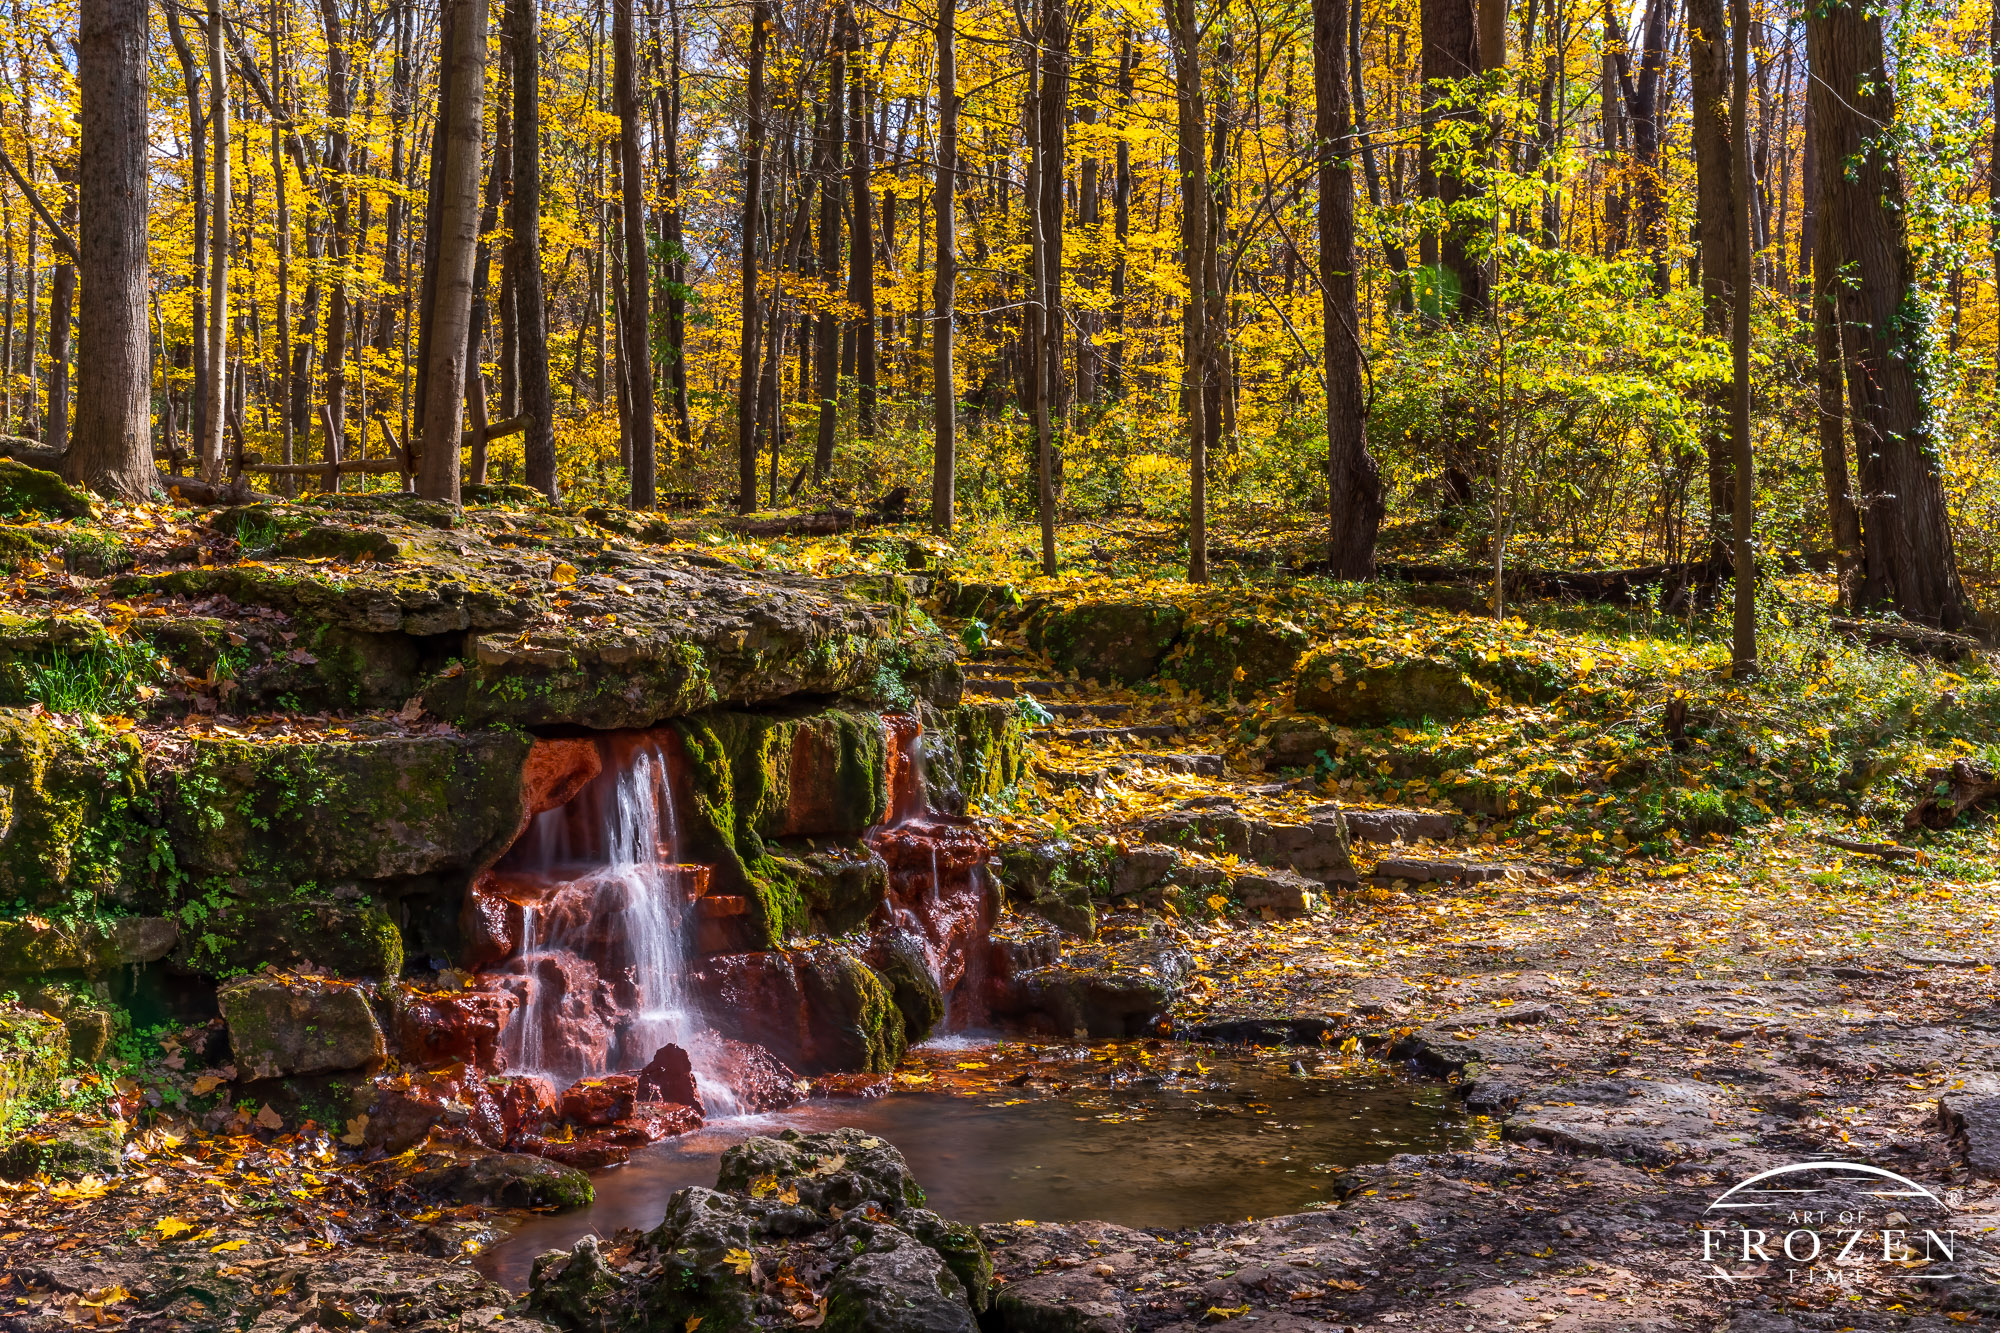 The famous Yellow Springs waterfall basks in autumn light under a falling canopy of bright yellow Sugar Maple leaves.